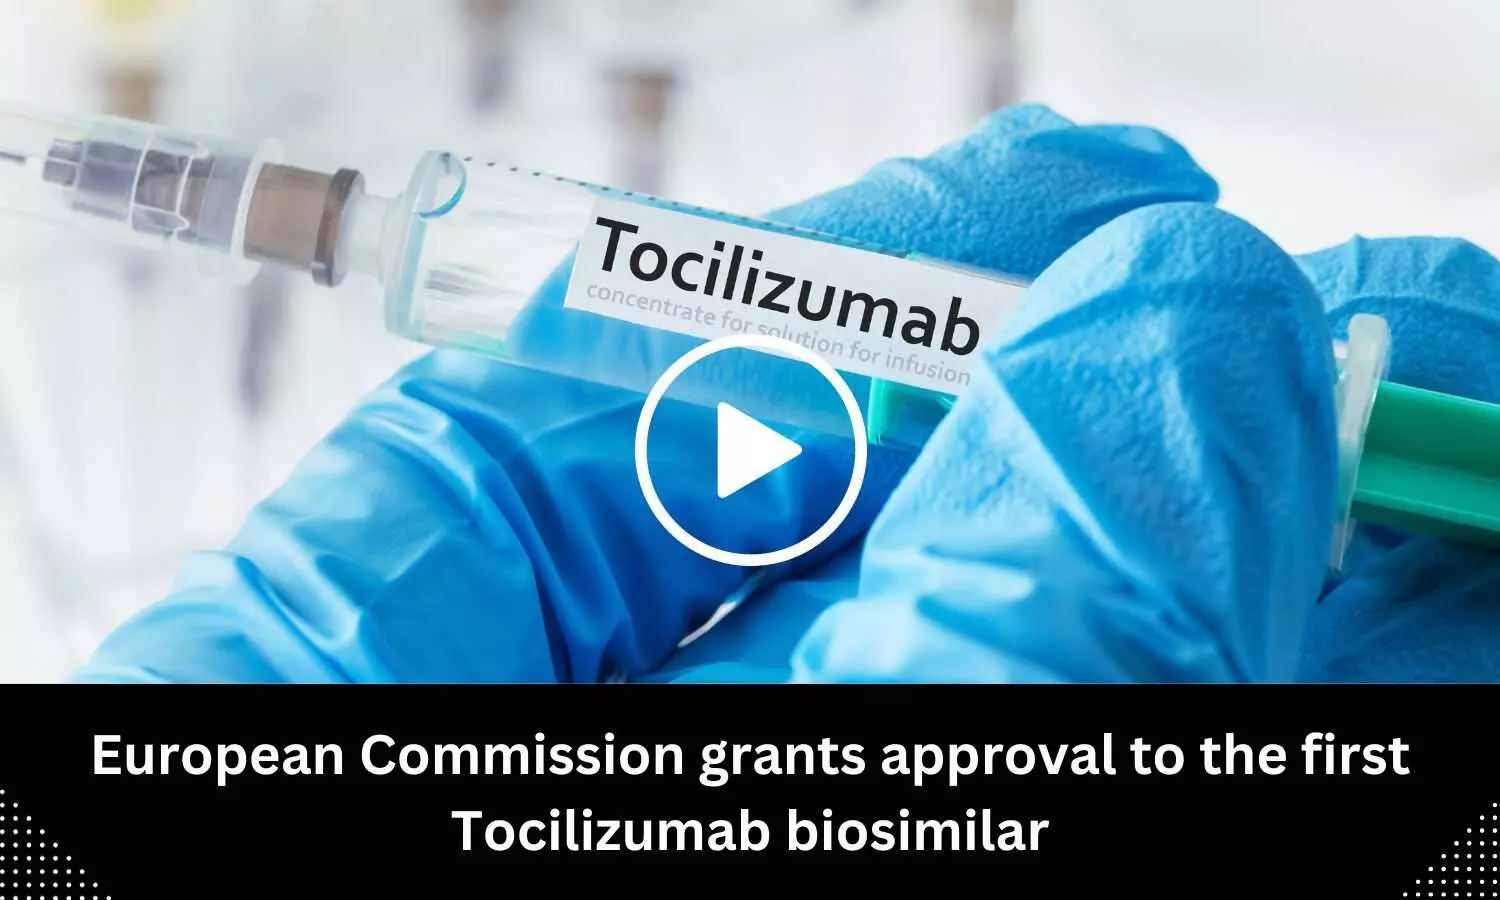 European Commission grants approval to the first Tocilizumab biosimilar